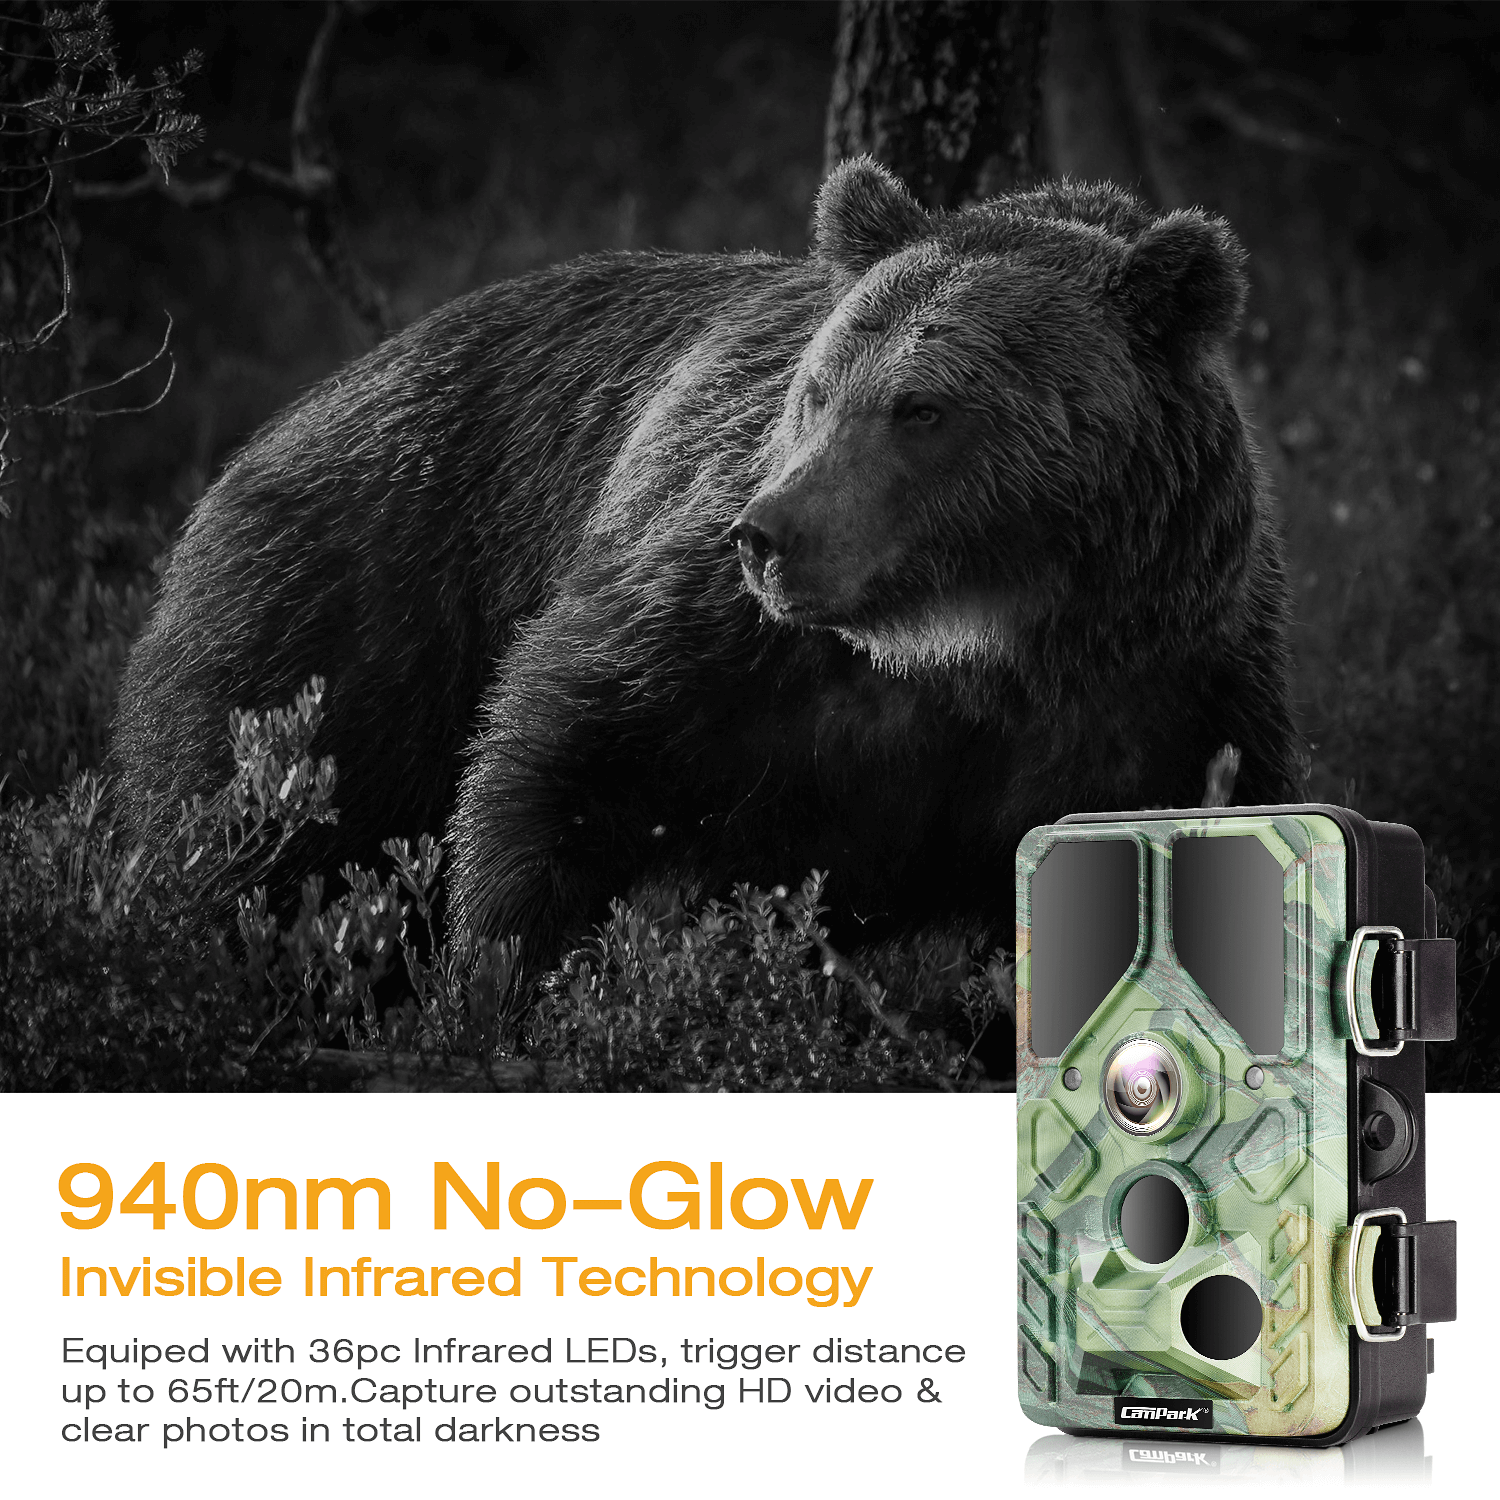 Campark T85 Trail Camera has infrared night vision lens